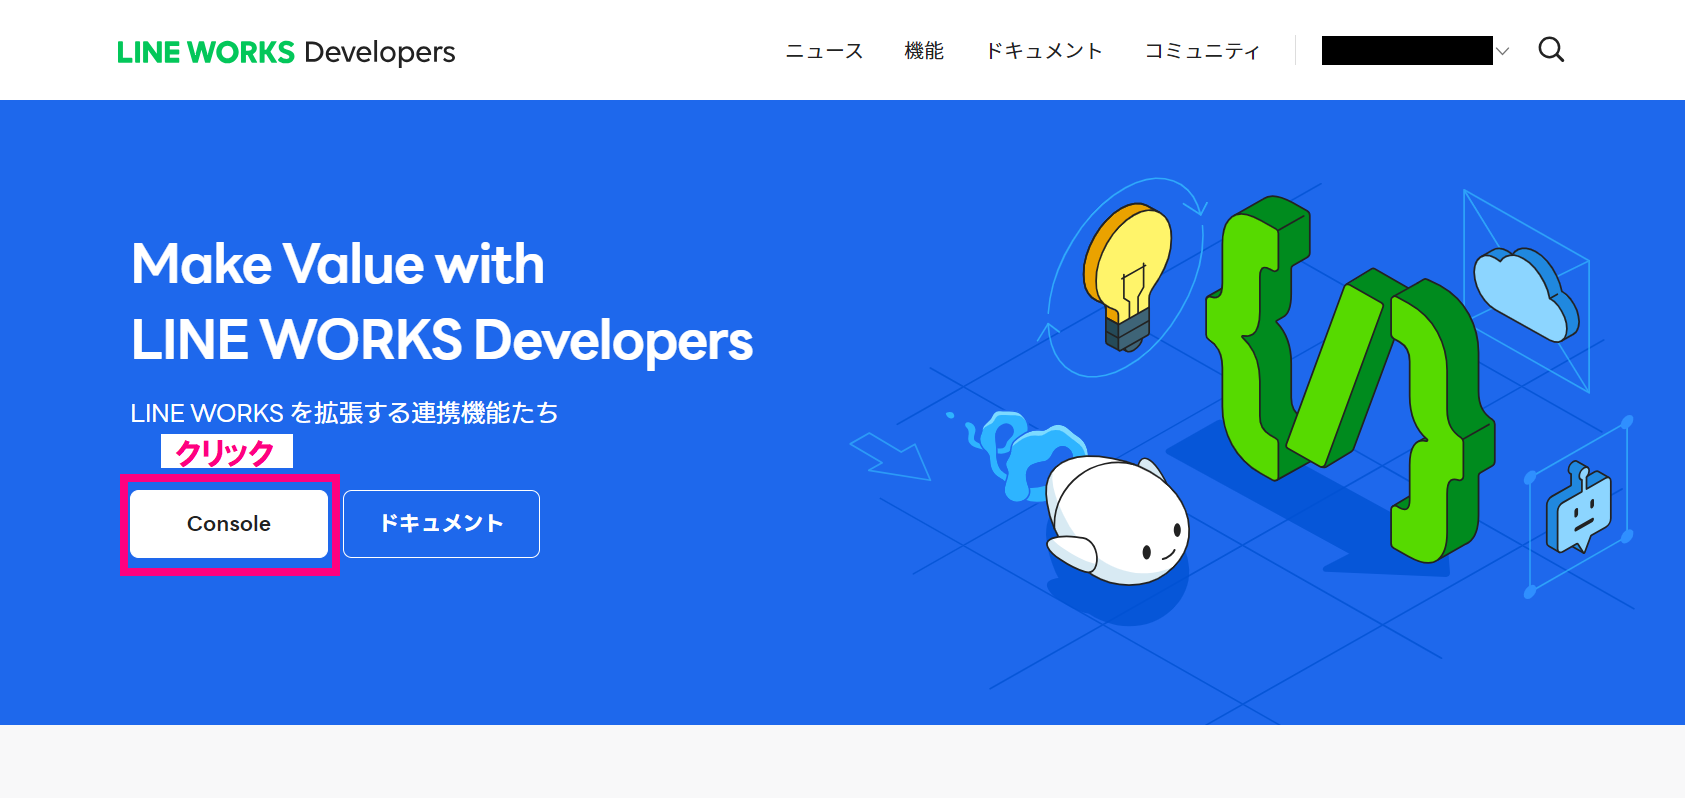 LINE WORKS Developers Consoleクリック.png